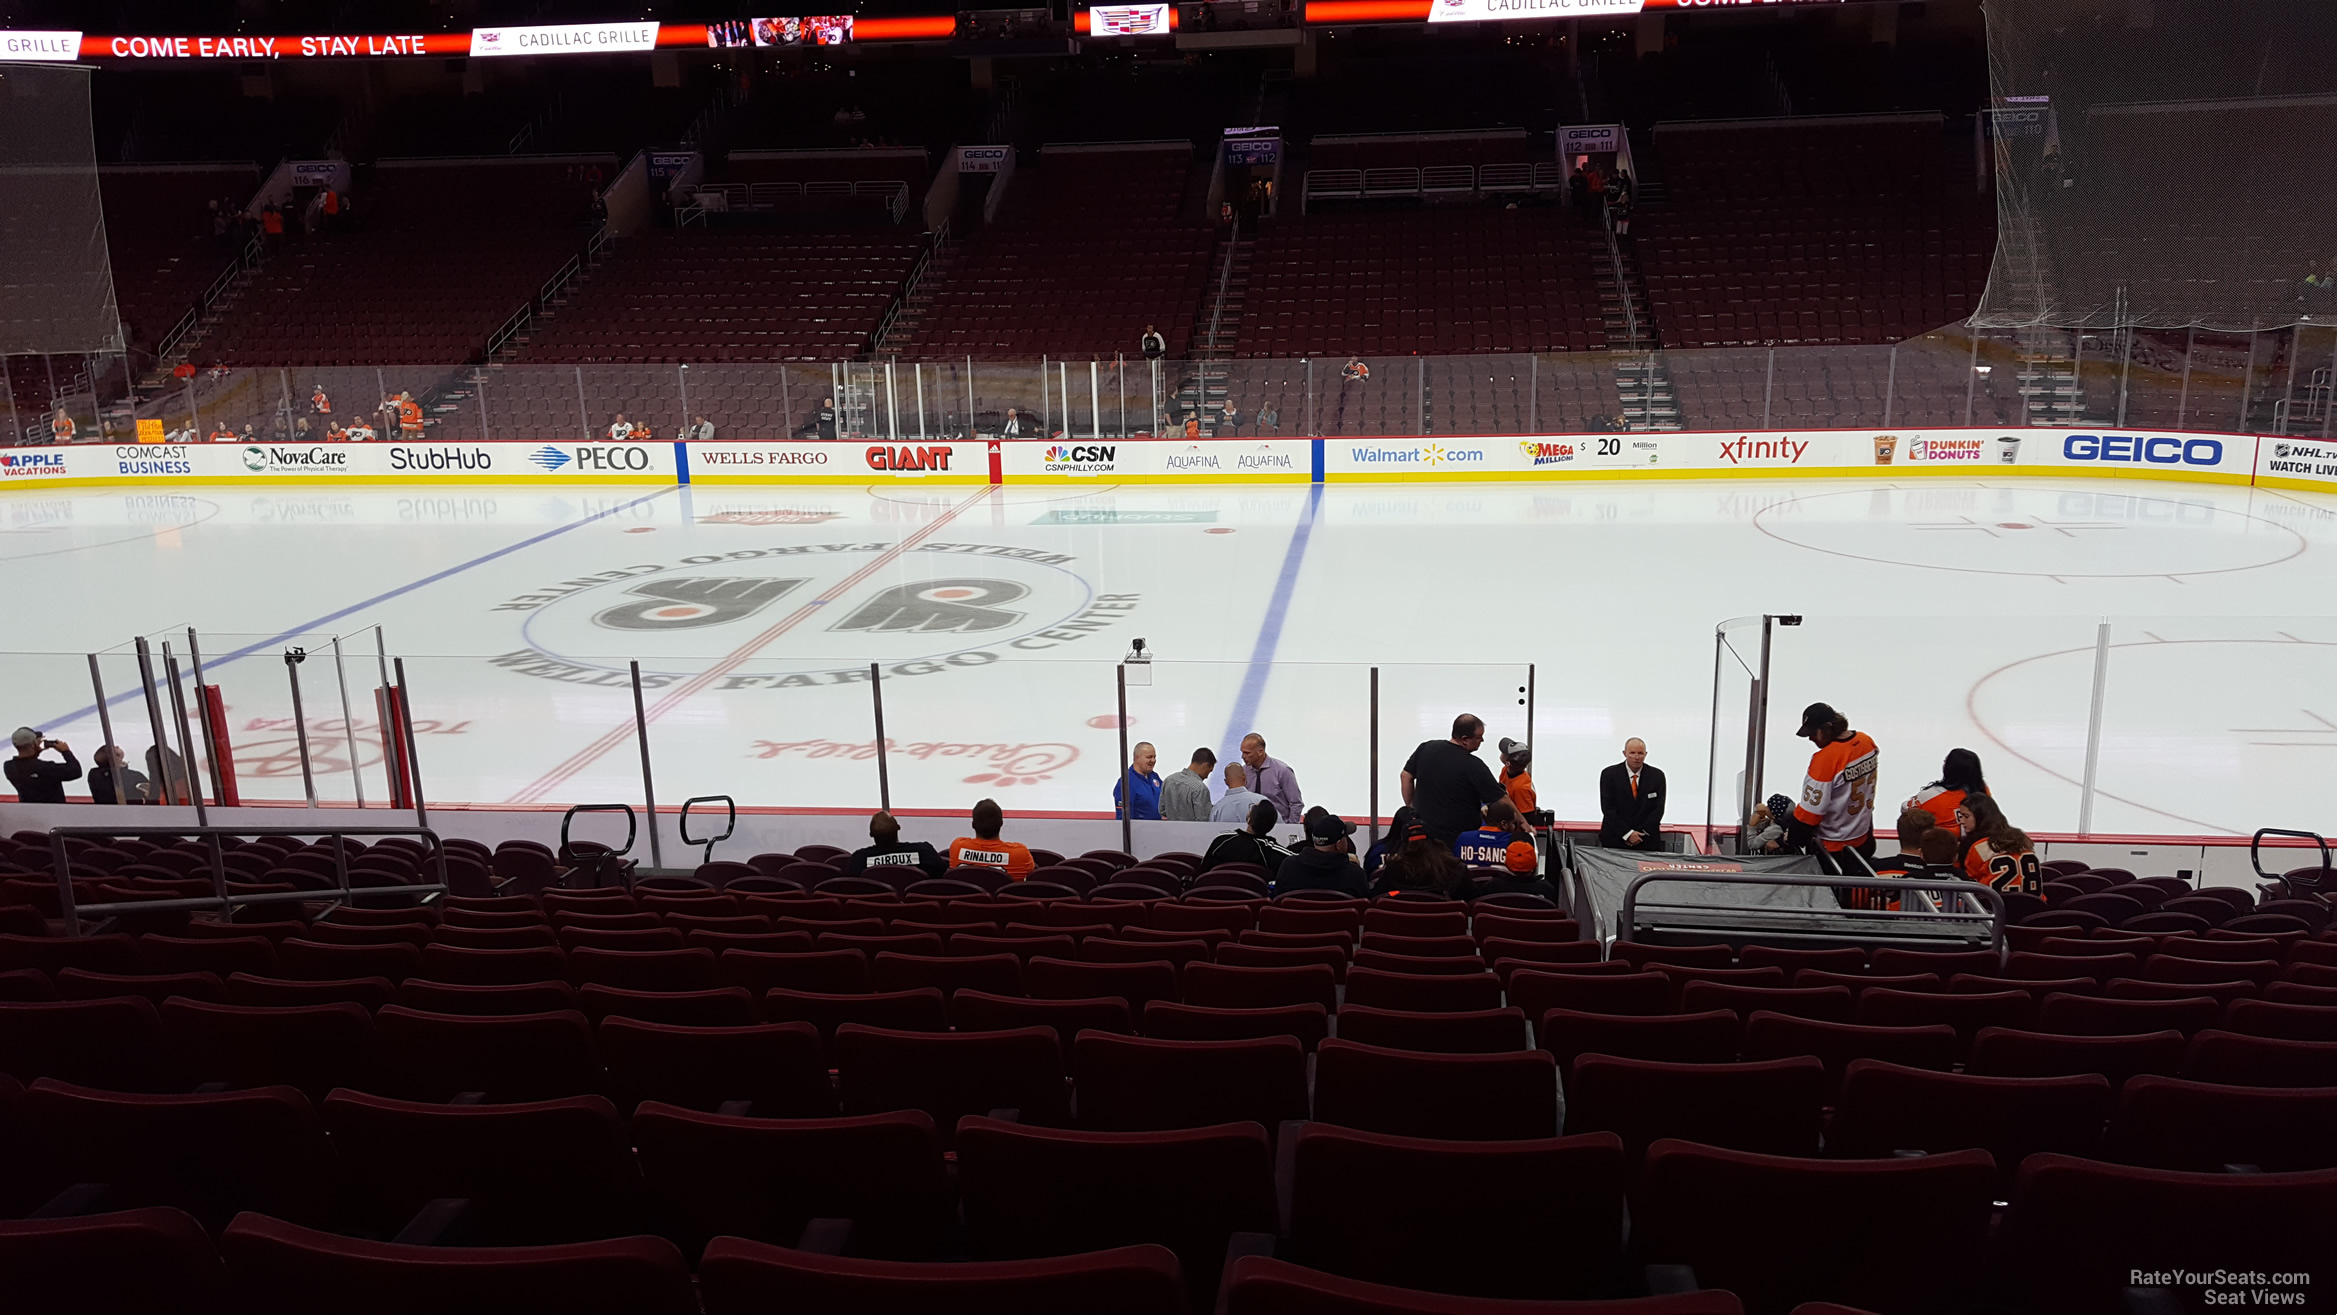 section 102, row 17 seat view  for hockey - wells fargo center